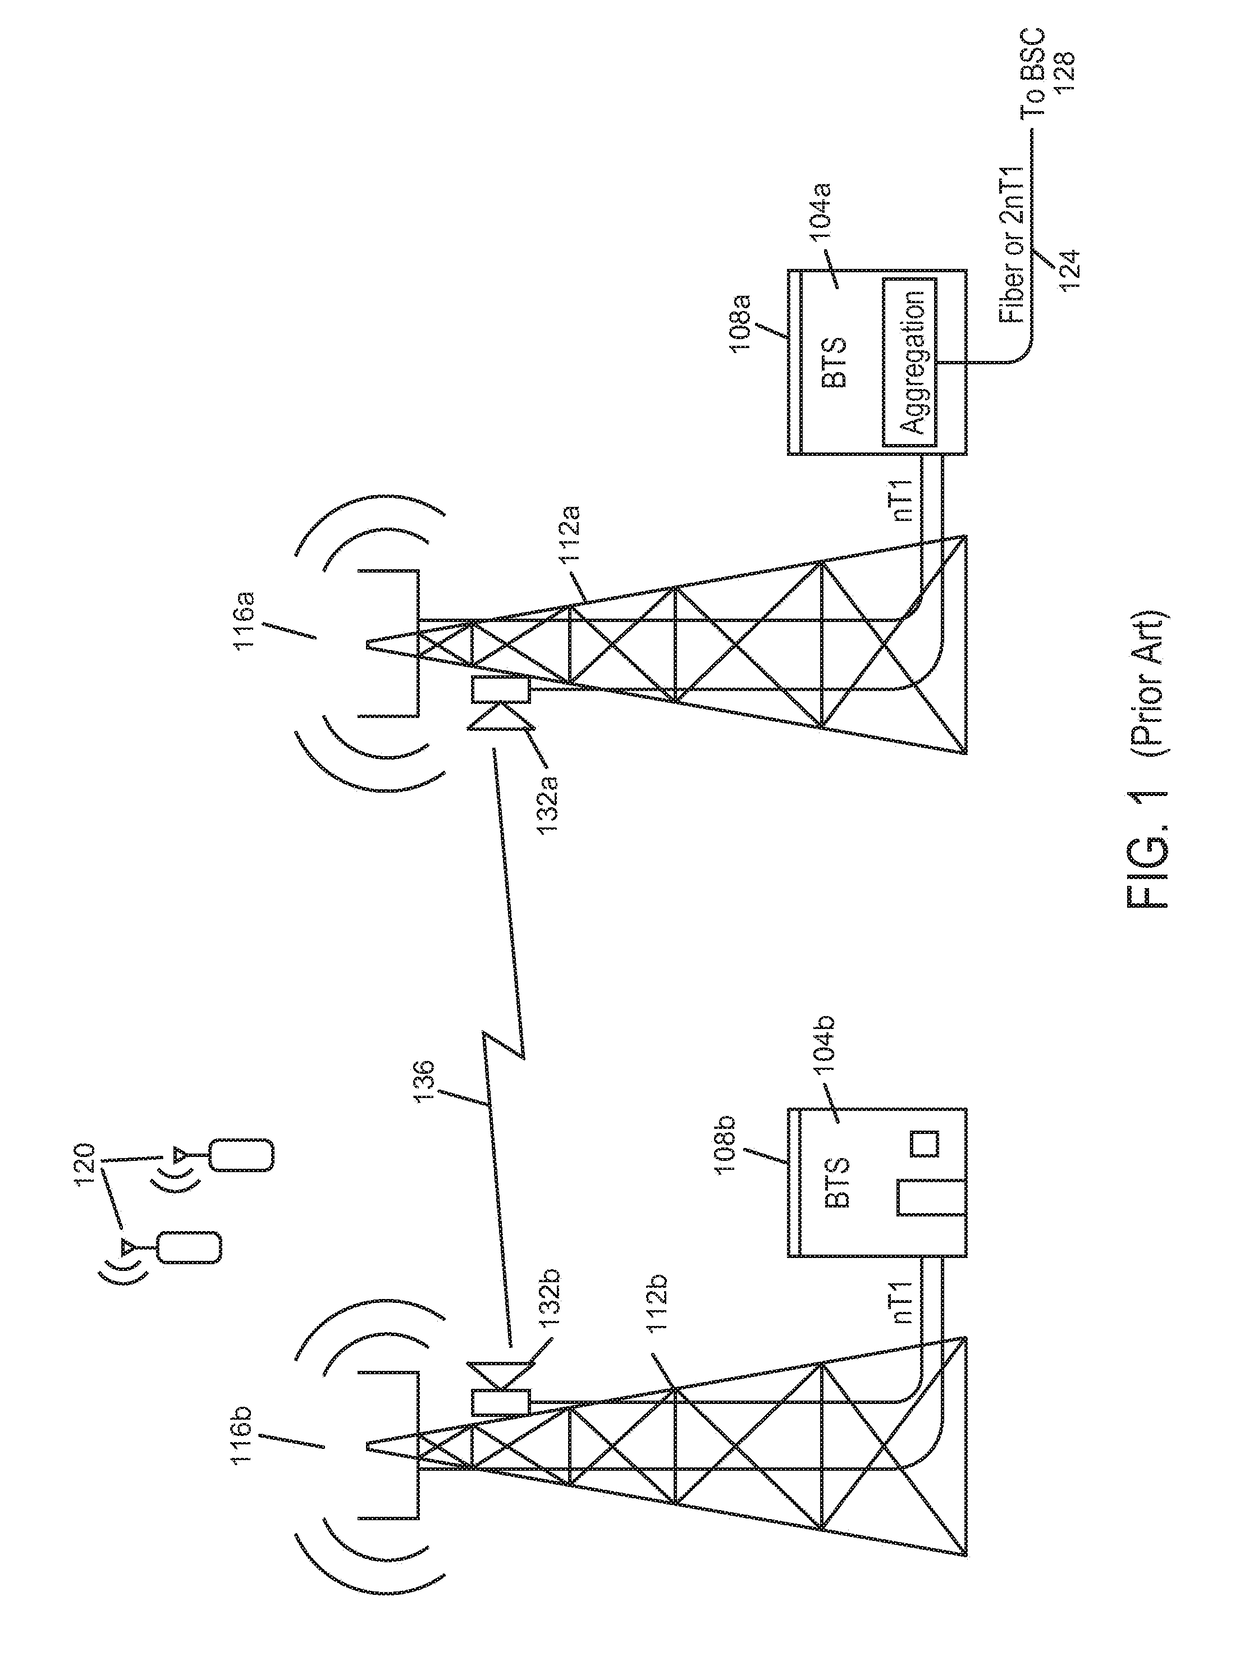 Radio with antenna array and multiple RF bands